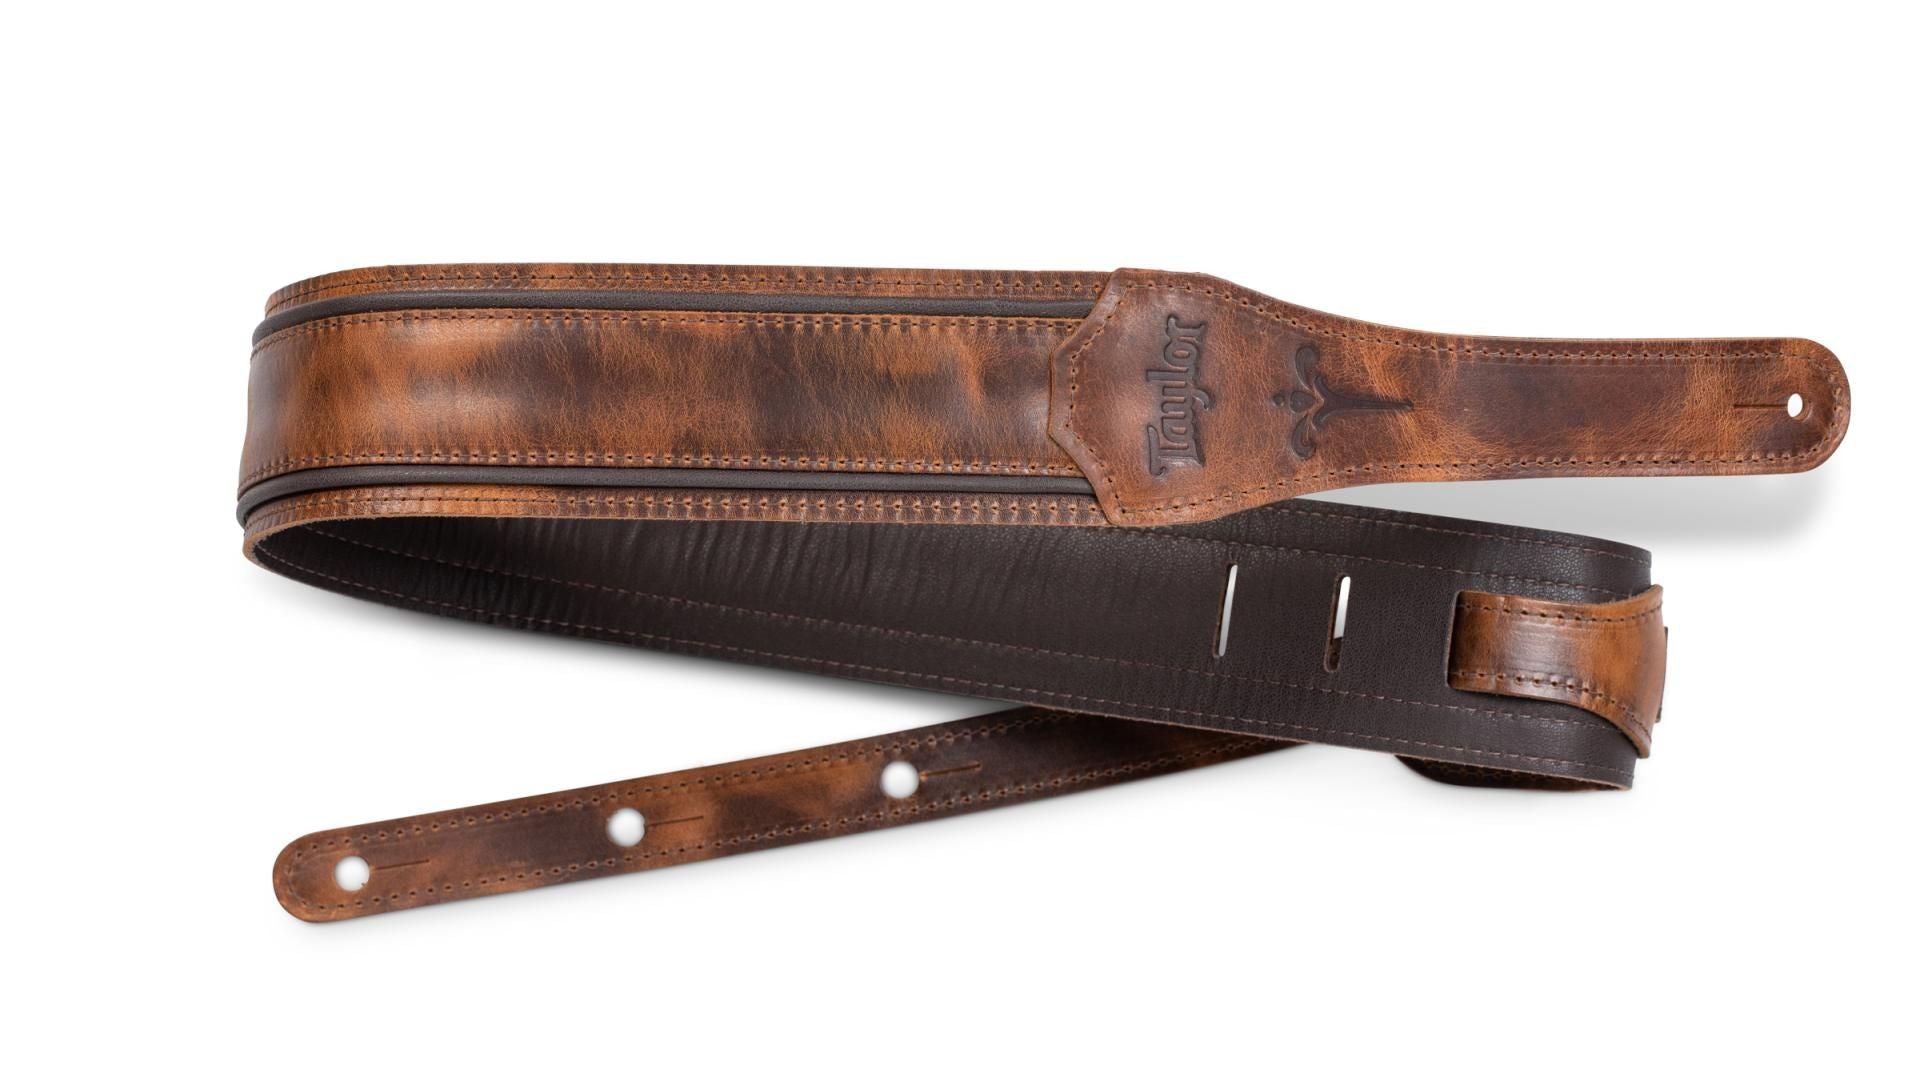 Taylor Fountain Strap - Leather 2.5" - Weathered Brn